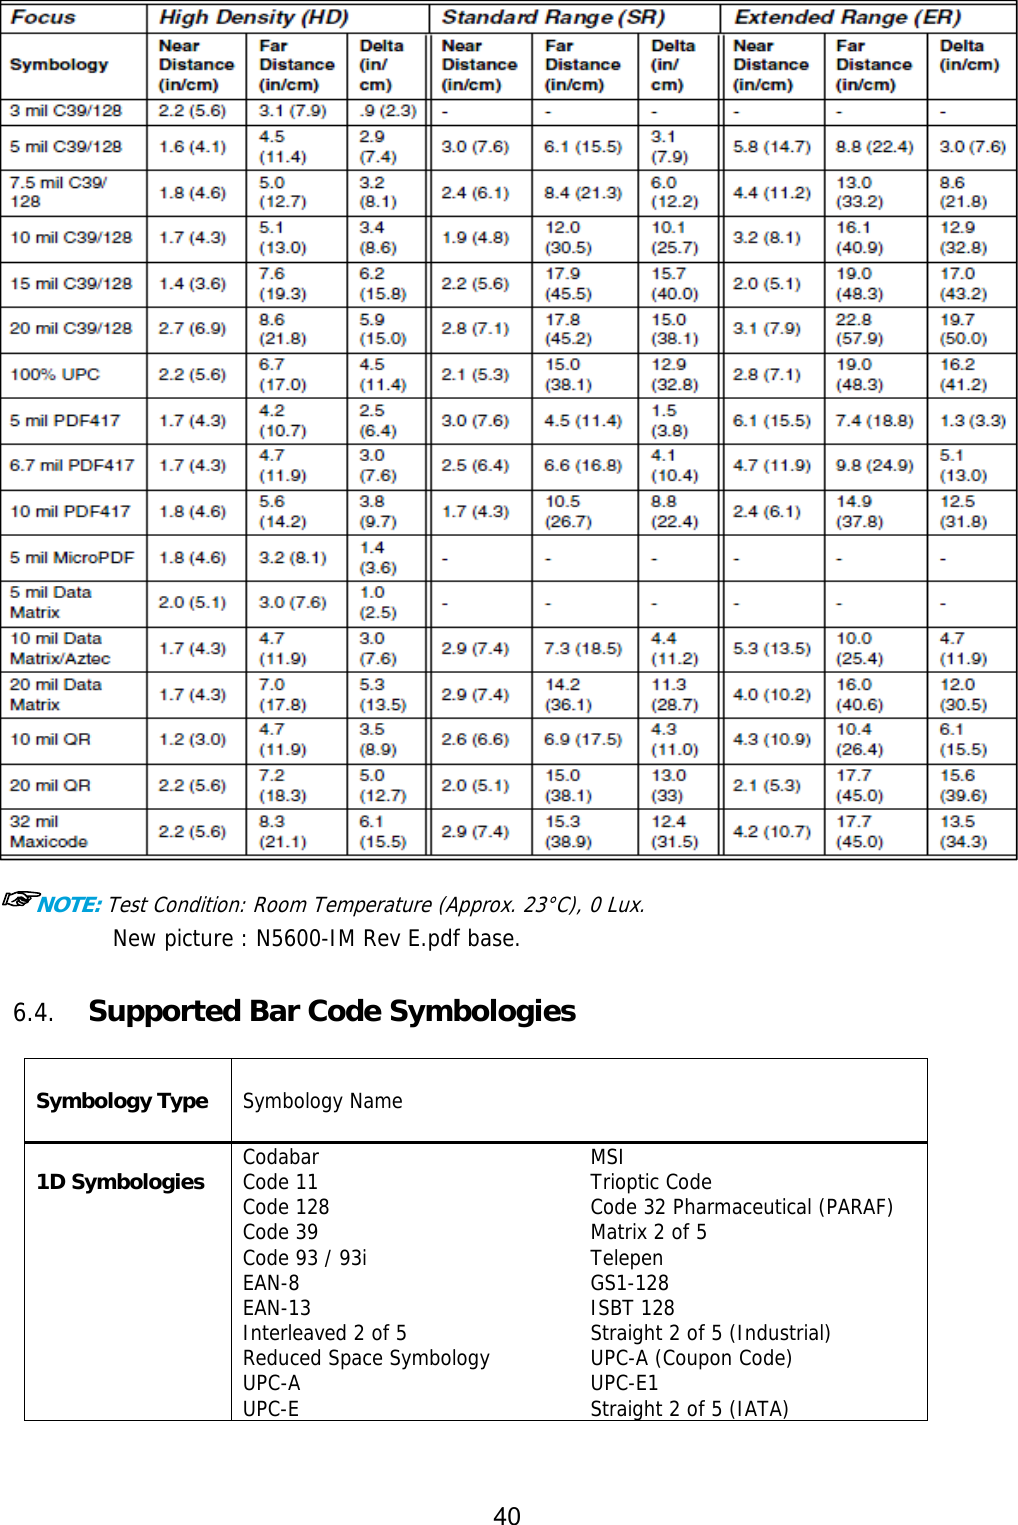 40    ☞NOTE: Test Condition: Room Temperature (Approx. 23°C), 0 Lux.  New picture : N5600-IM Rev E.pdf base.   6.4. Supported Bar Code Symbologies  Symbology Type  Symbology Name  1D Symbologies Codabar Code 11 Code 128 Code 39 Code 93 / 93i EAN-8 EAN-13 Interleaved 2 of 5 Reduced Space Symbology UPC-A UPC-E MSI Trioptic Code Code 32 Pharmaceutical (PARAF) Matrix 2 of 5 Telepen GS1-128 ISBT 128 Straight 2 of 5 (Industrial) UPC-A (Coupon Code) UPC-E1  Straight 2 of 5 (IATA) 